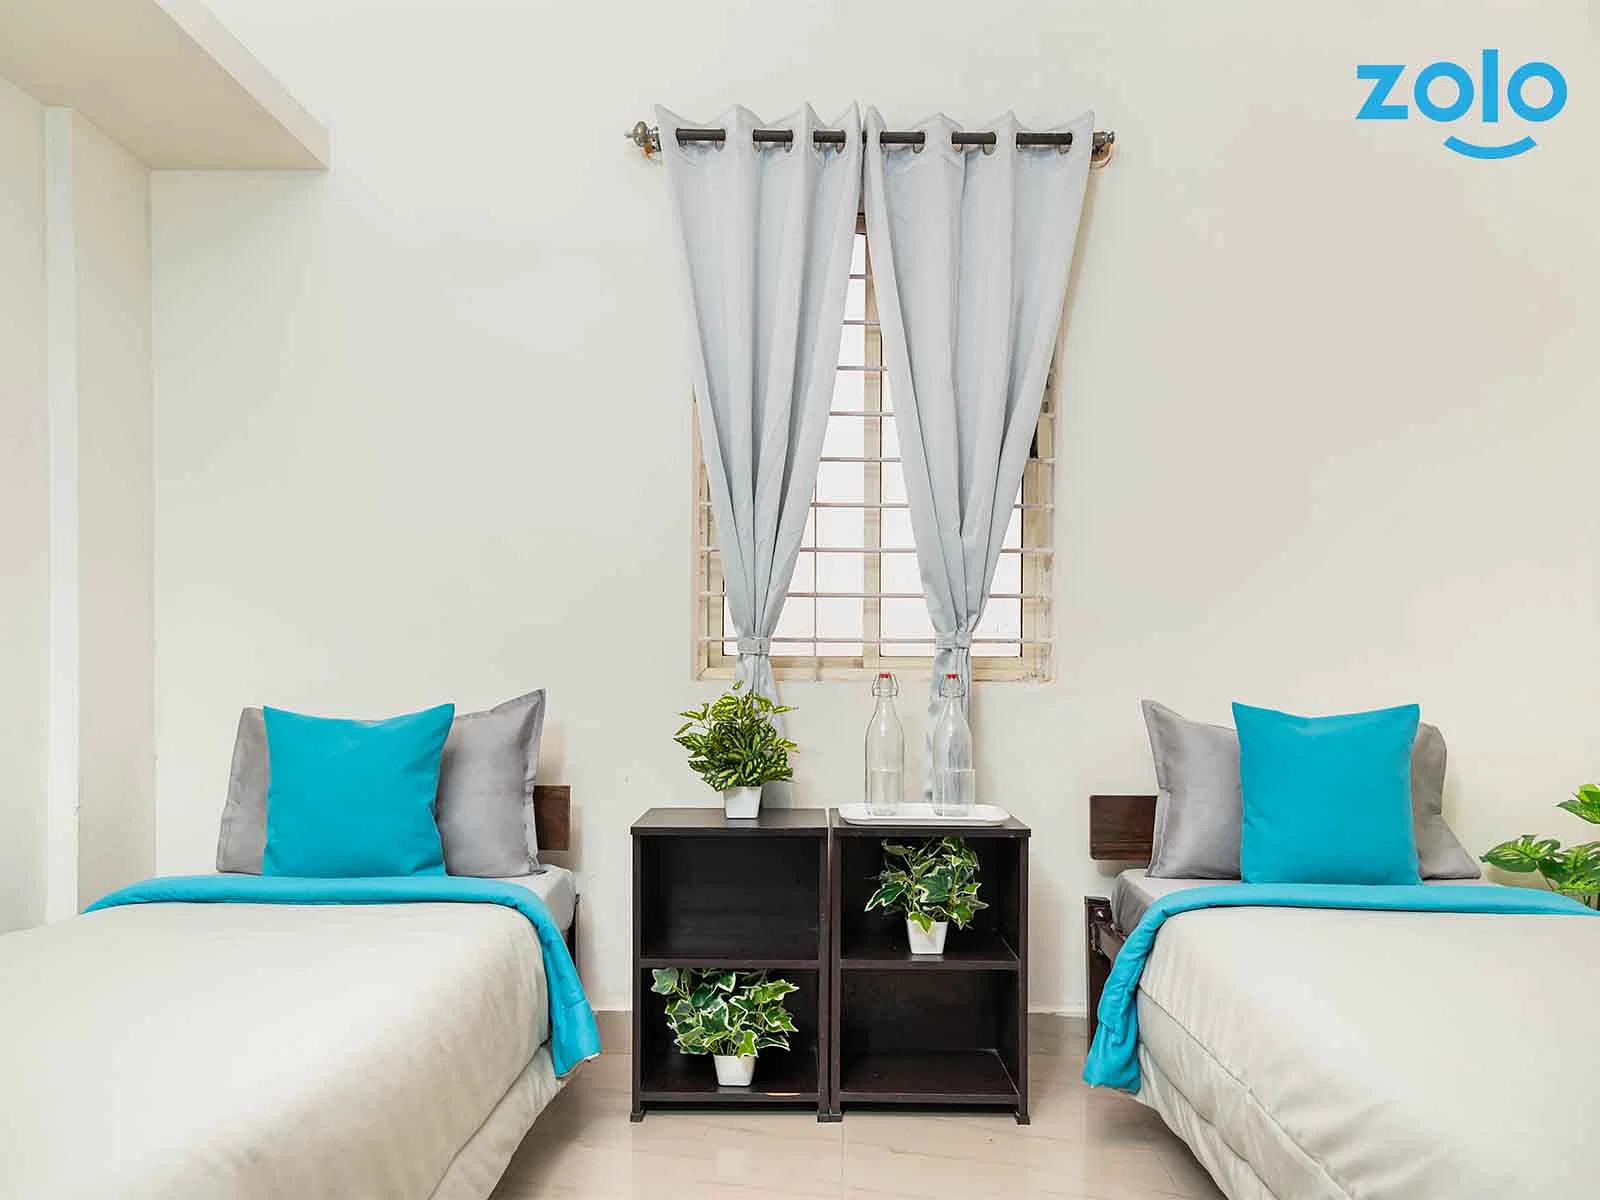 pgs in Electronic City Phase 2 with Daily housekeeping facilities and free Wi-Fi-Zolo Atlantis